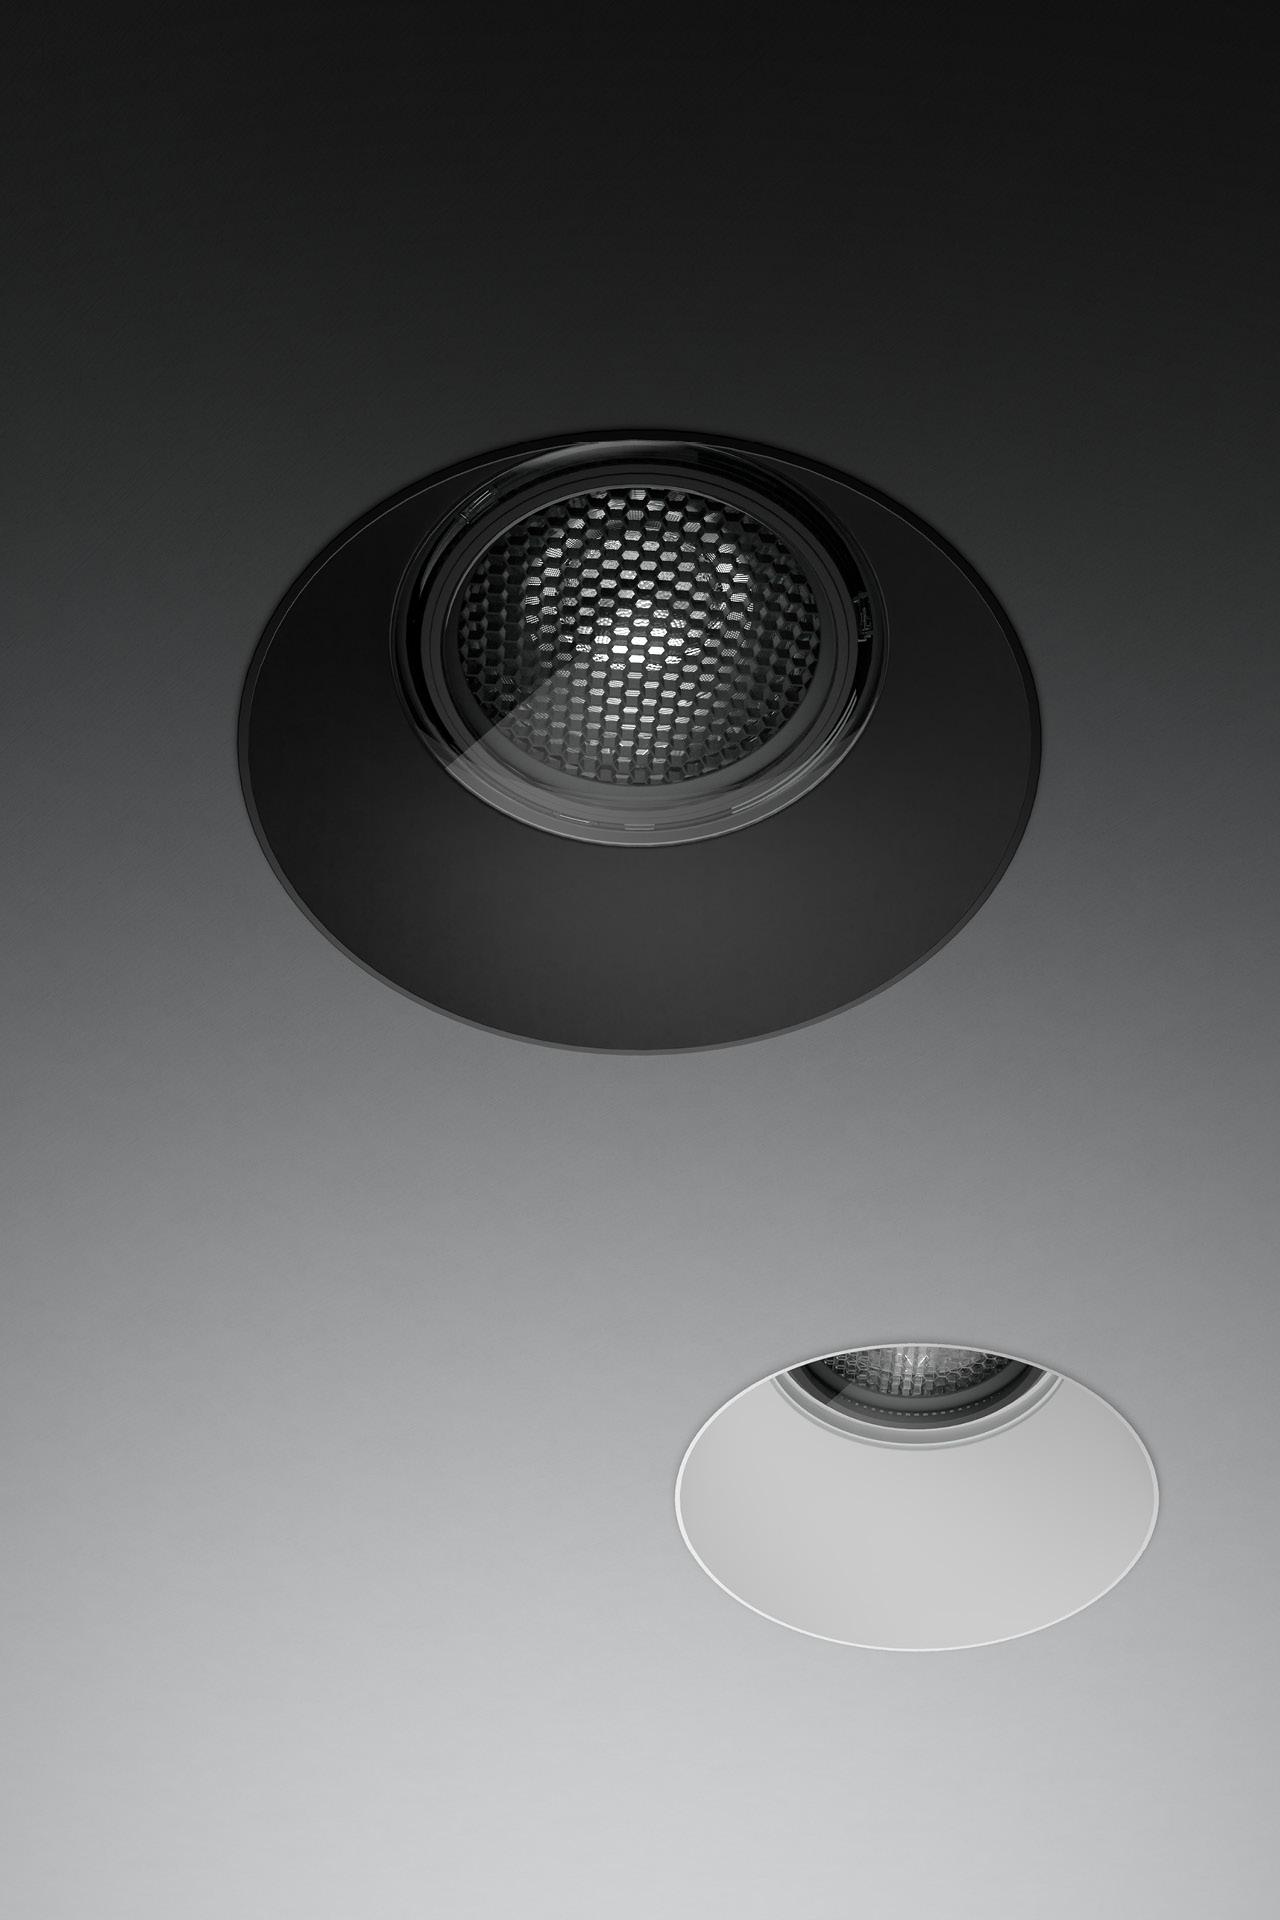 Gallery Product Modoc Downlight Linealightgroup Zzzxzzz13